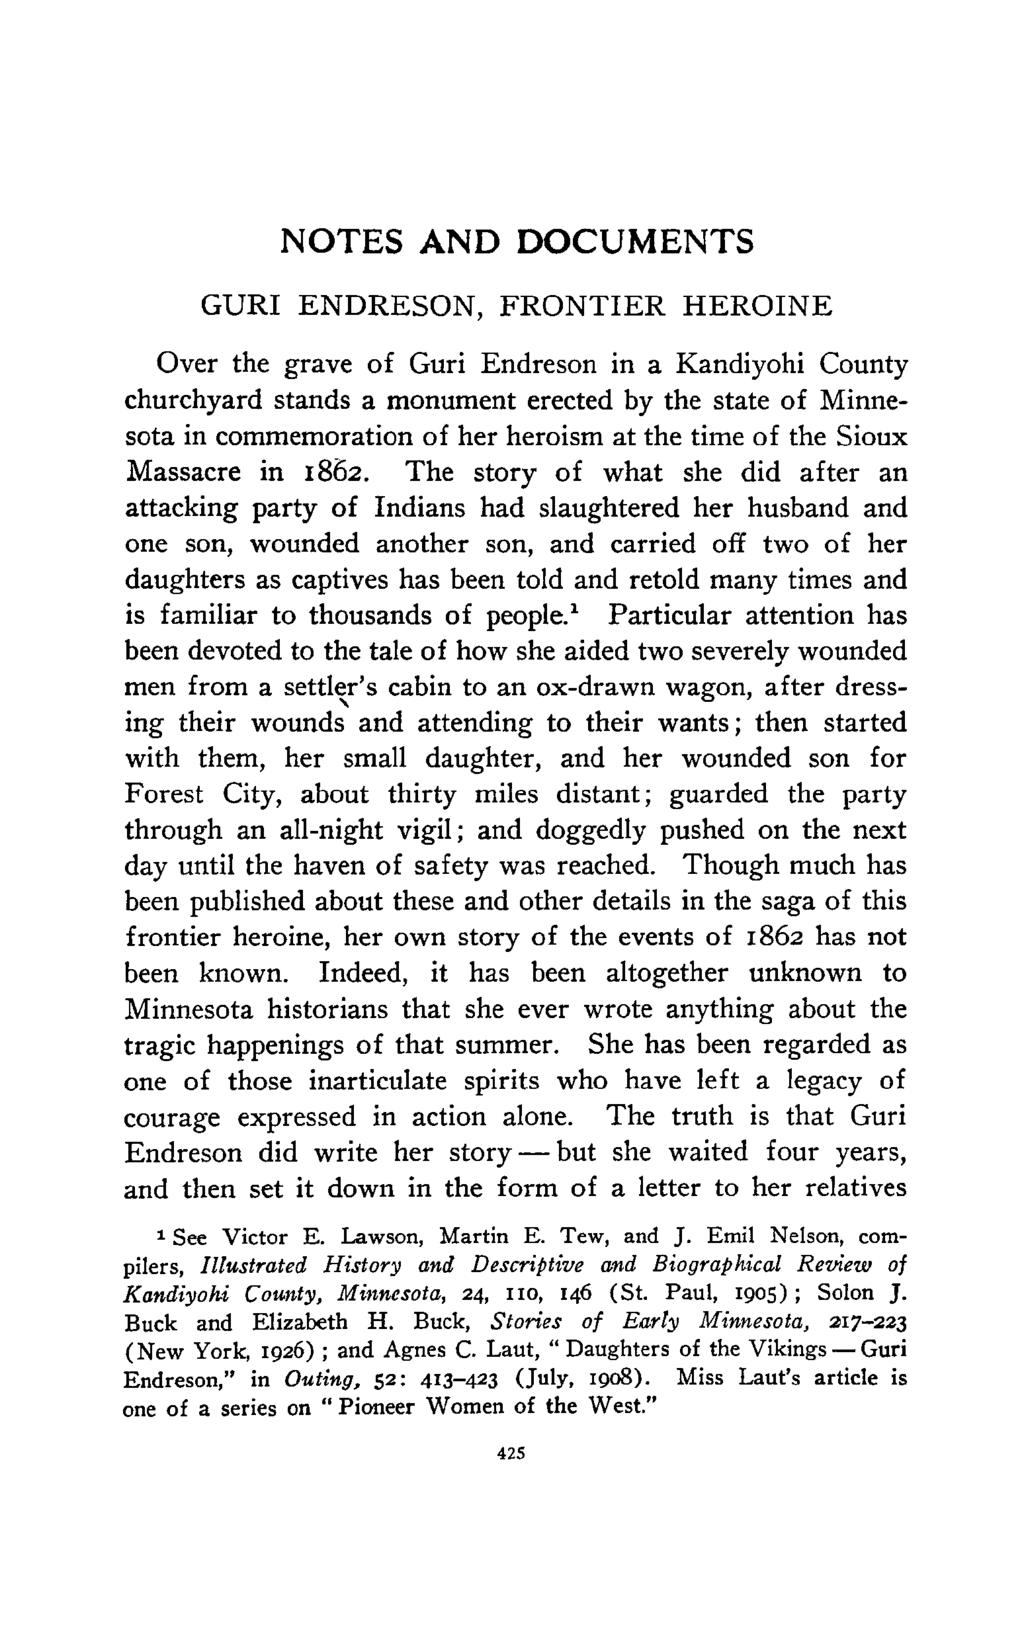 NOTES AND DOCUMENTS GURI ENDRESON, FRONTIER HEROINE Over the grave of Guri Endreson in a Kandiyohi County churchyard stands a monument erected by the state of Minnesota in commemoration of her